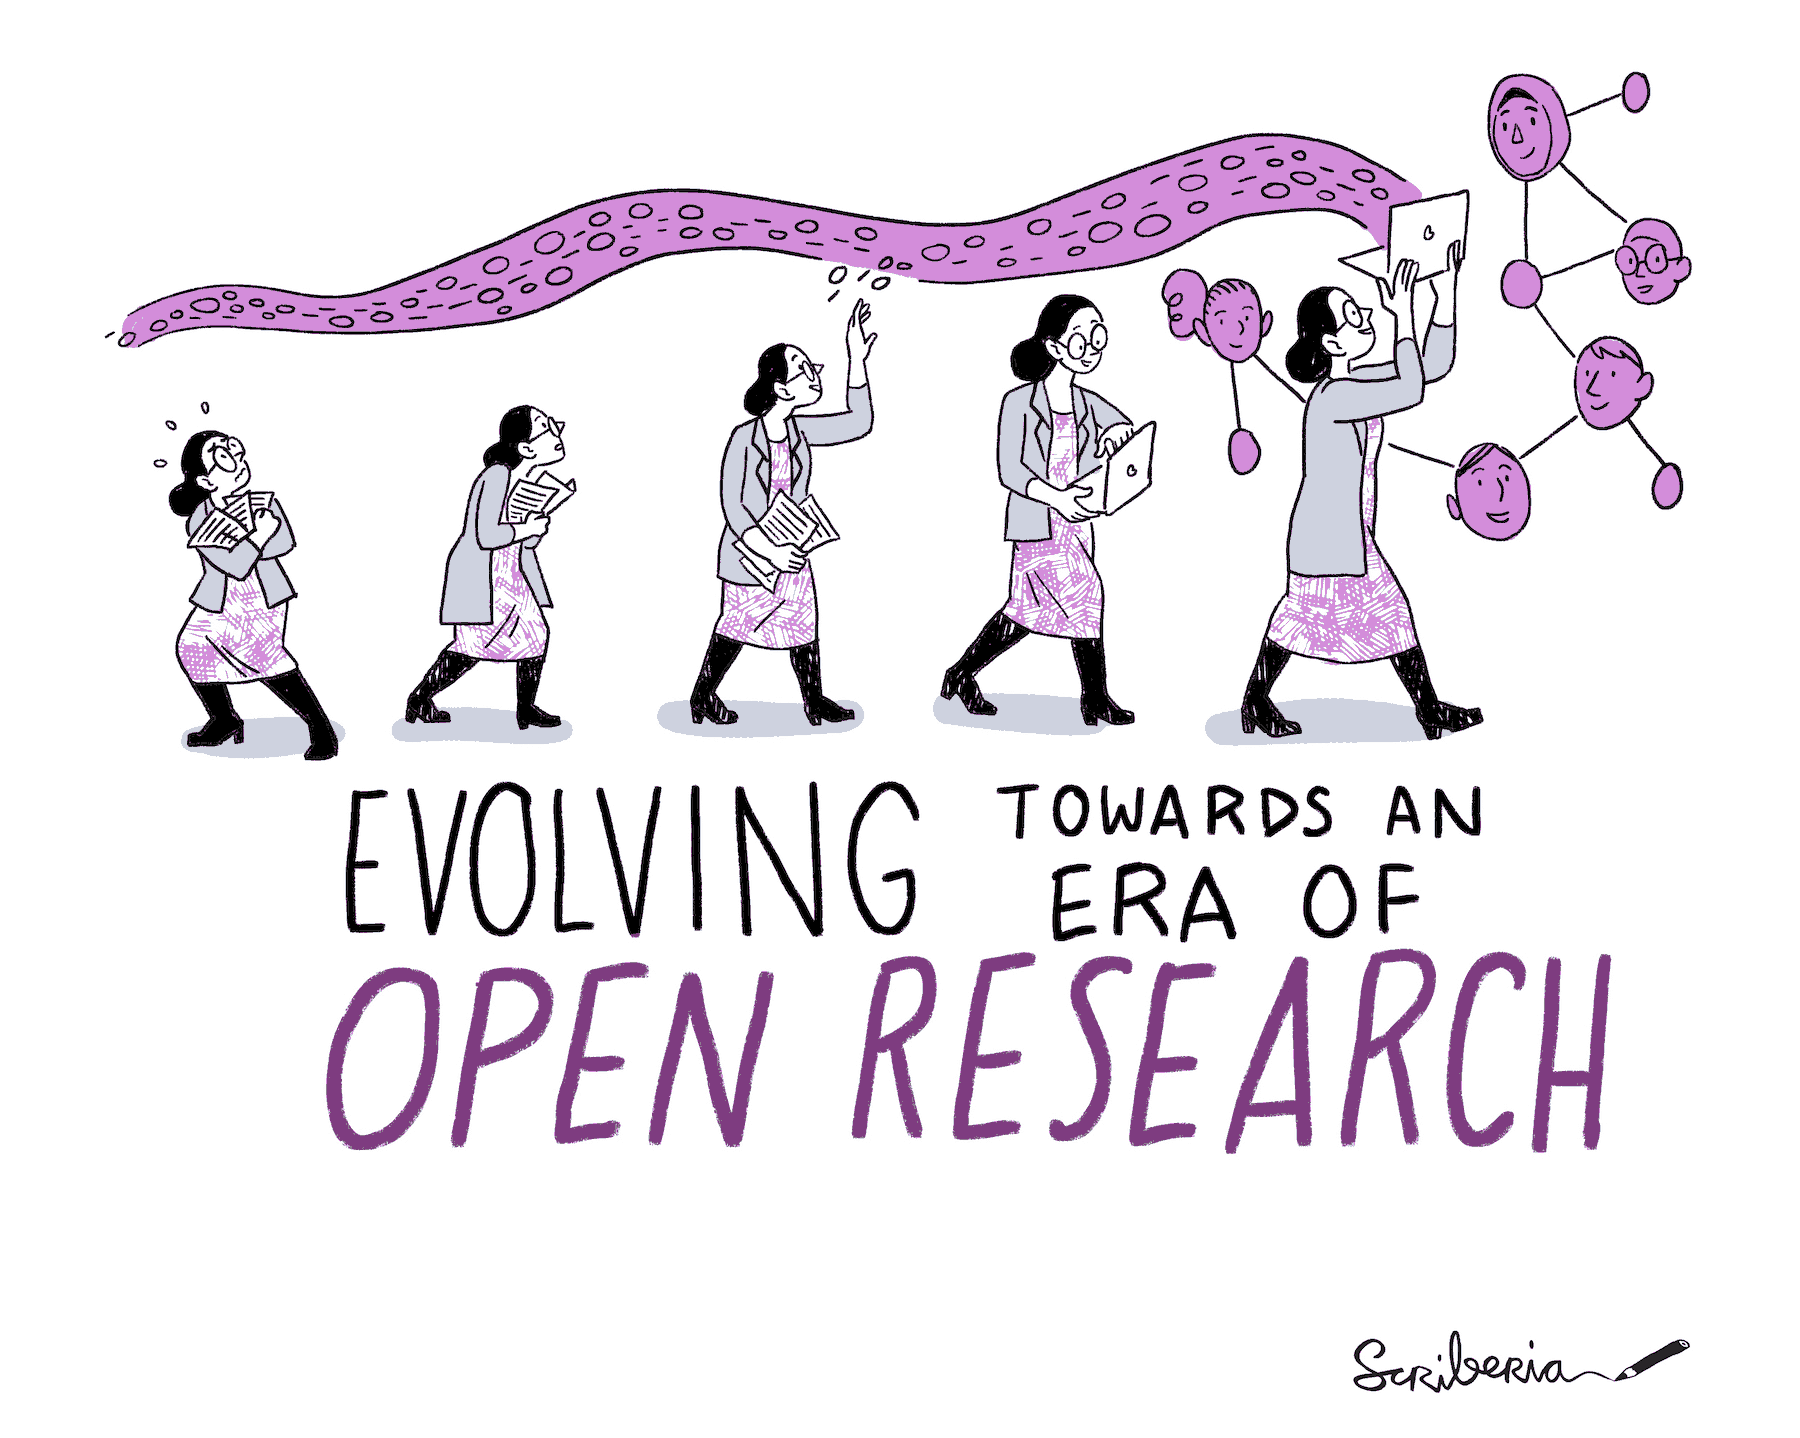 This image shows a researcher evolving their research practices to move towards the era of open research. The image starts with the person looking anxious about engaging with open science, slowly they take a few steps, feel comfortable about sharing their work, and finally start to collaborate with others.